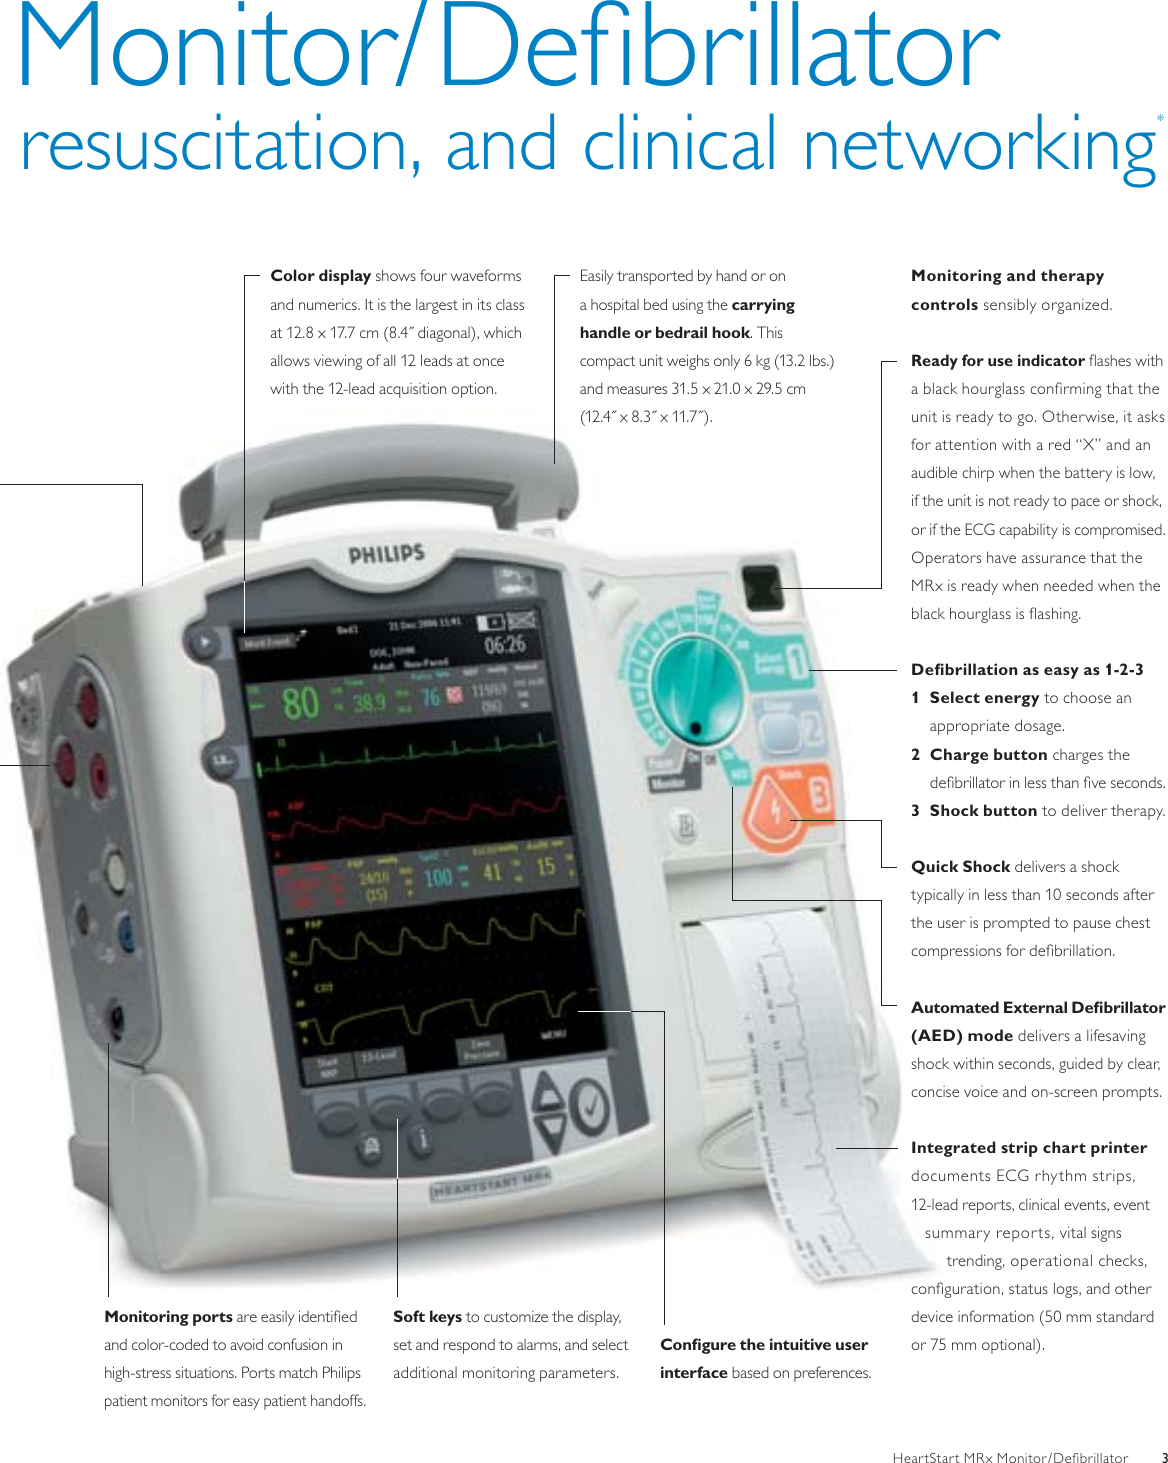 Page 3 of 12 - Philips 4522_962_24371 MRx Monitor/Defibrillator With Q-CPR And Intelli Vue Clinical Network Brochure - Hospital (ENG)